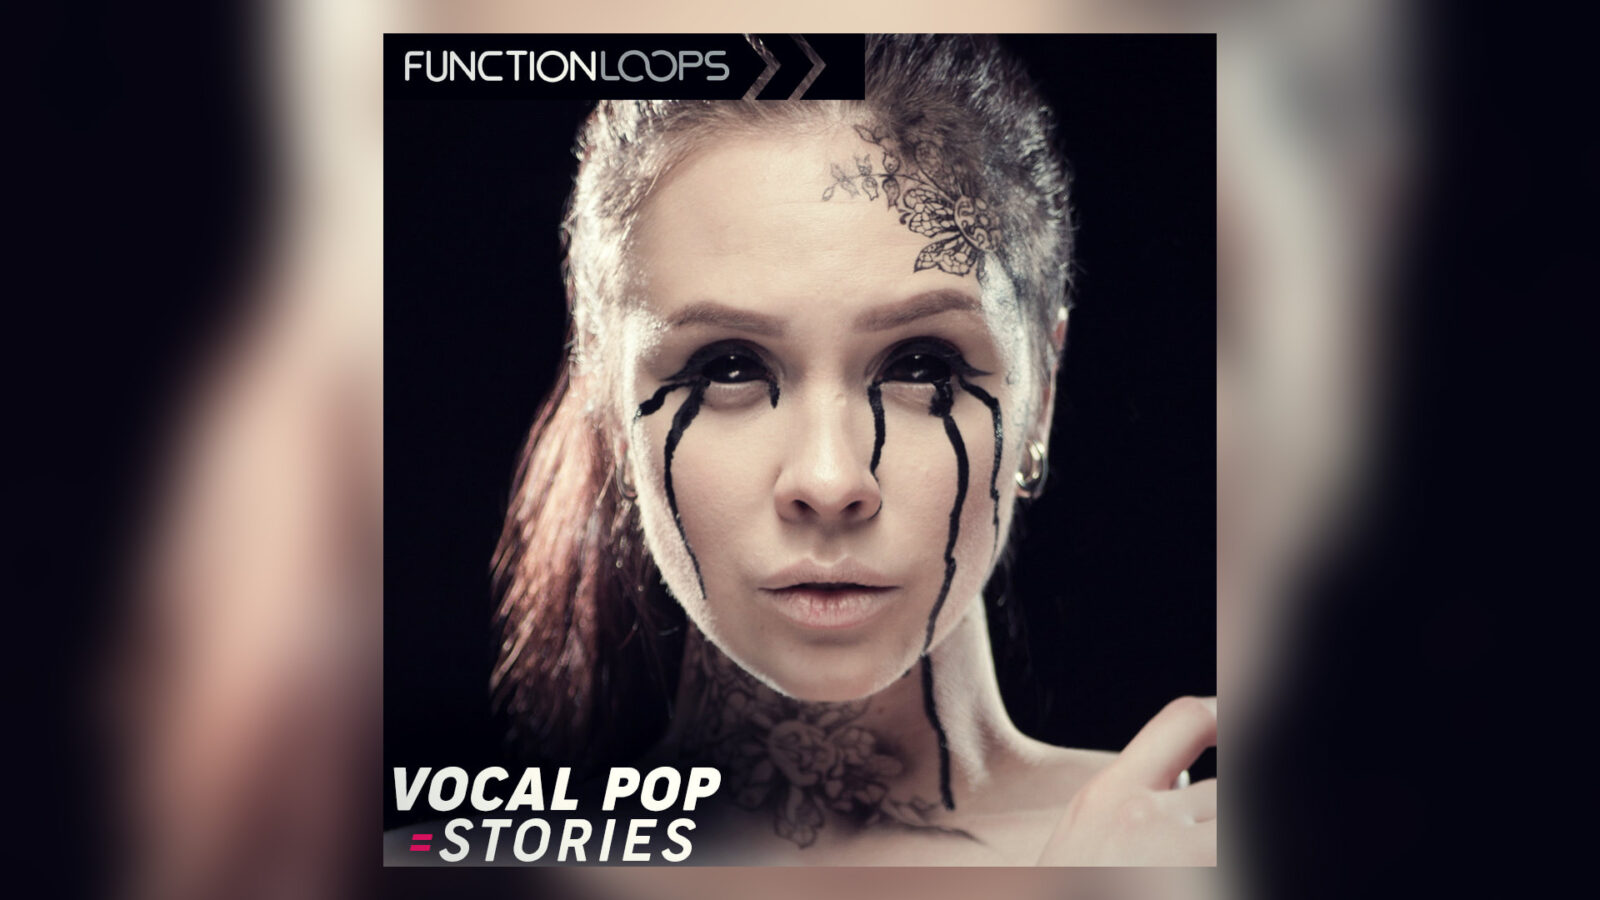 Vocal Pop Stories Sample Pack Is Now Free! (Worth $17.90)